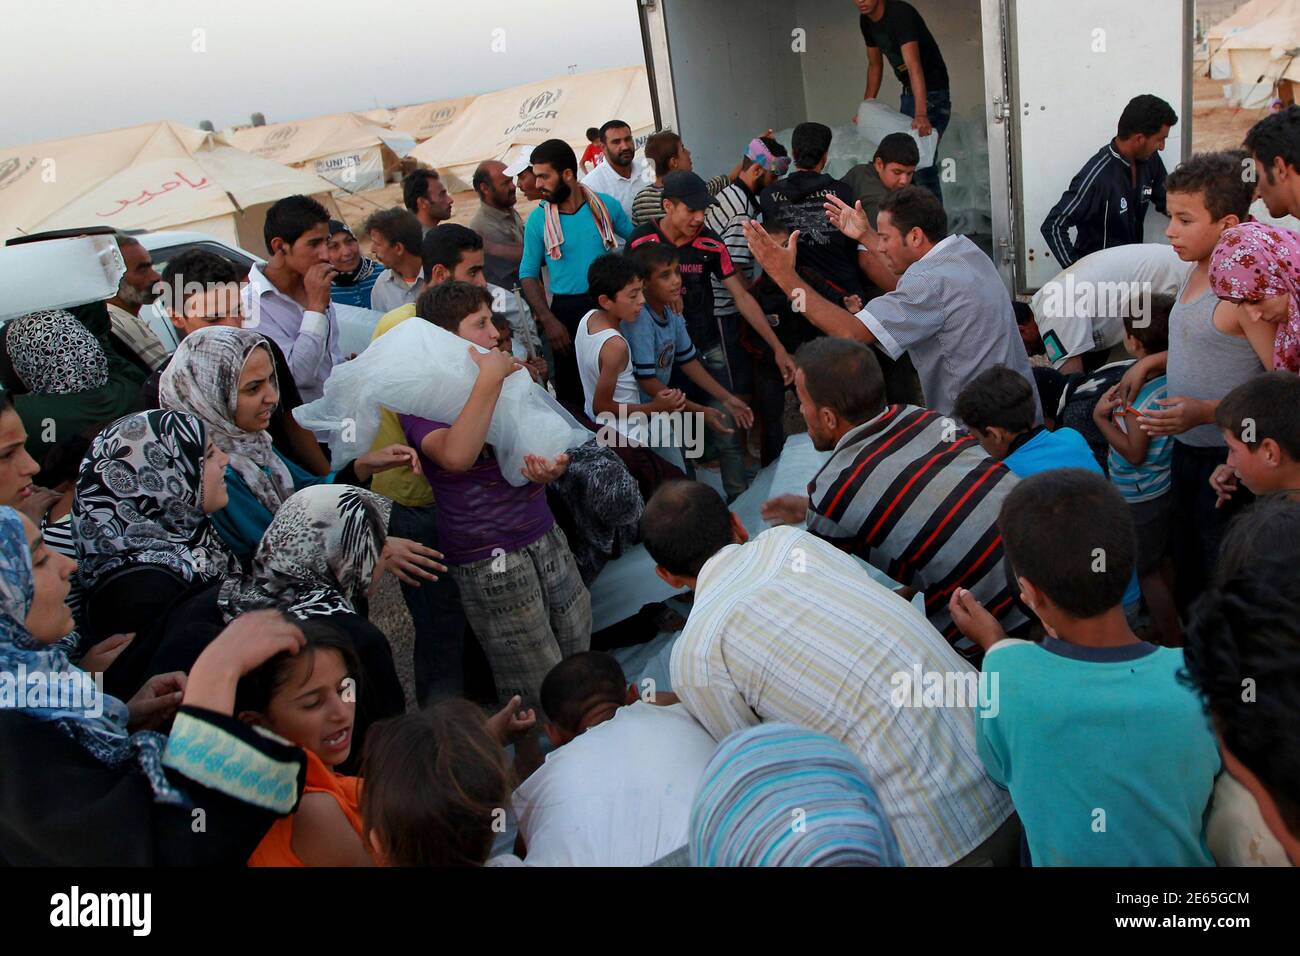 Syrian refugees wait to receive ice at the Al Zaatri refugee camp in the Jordanian city of Mafraq, near the border with Syria, July 31, 2012. Jordan opened the camp with 2,000 tents on Sunday, to accommodate an expected new influx of refugees near the border. Diplomats say around 115,000 Syrians have fled their country, mostly to Turkey, Lebanon and Jordan, to escape the 17-month rebellion against President Bashar al-Assad. The Jordanian authorities say around 130,000 Syrians have come to Jordan since the uprising began, but diplomats say not all of them are classified as refugees. REUTERS/Muh Stock Photo